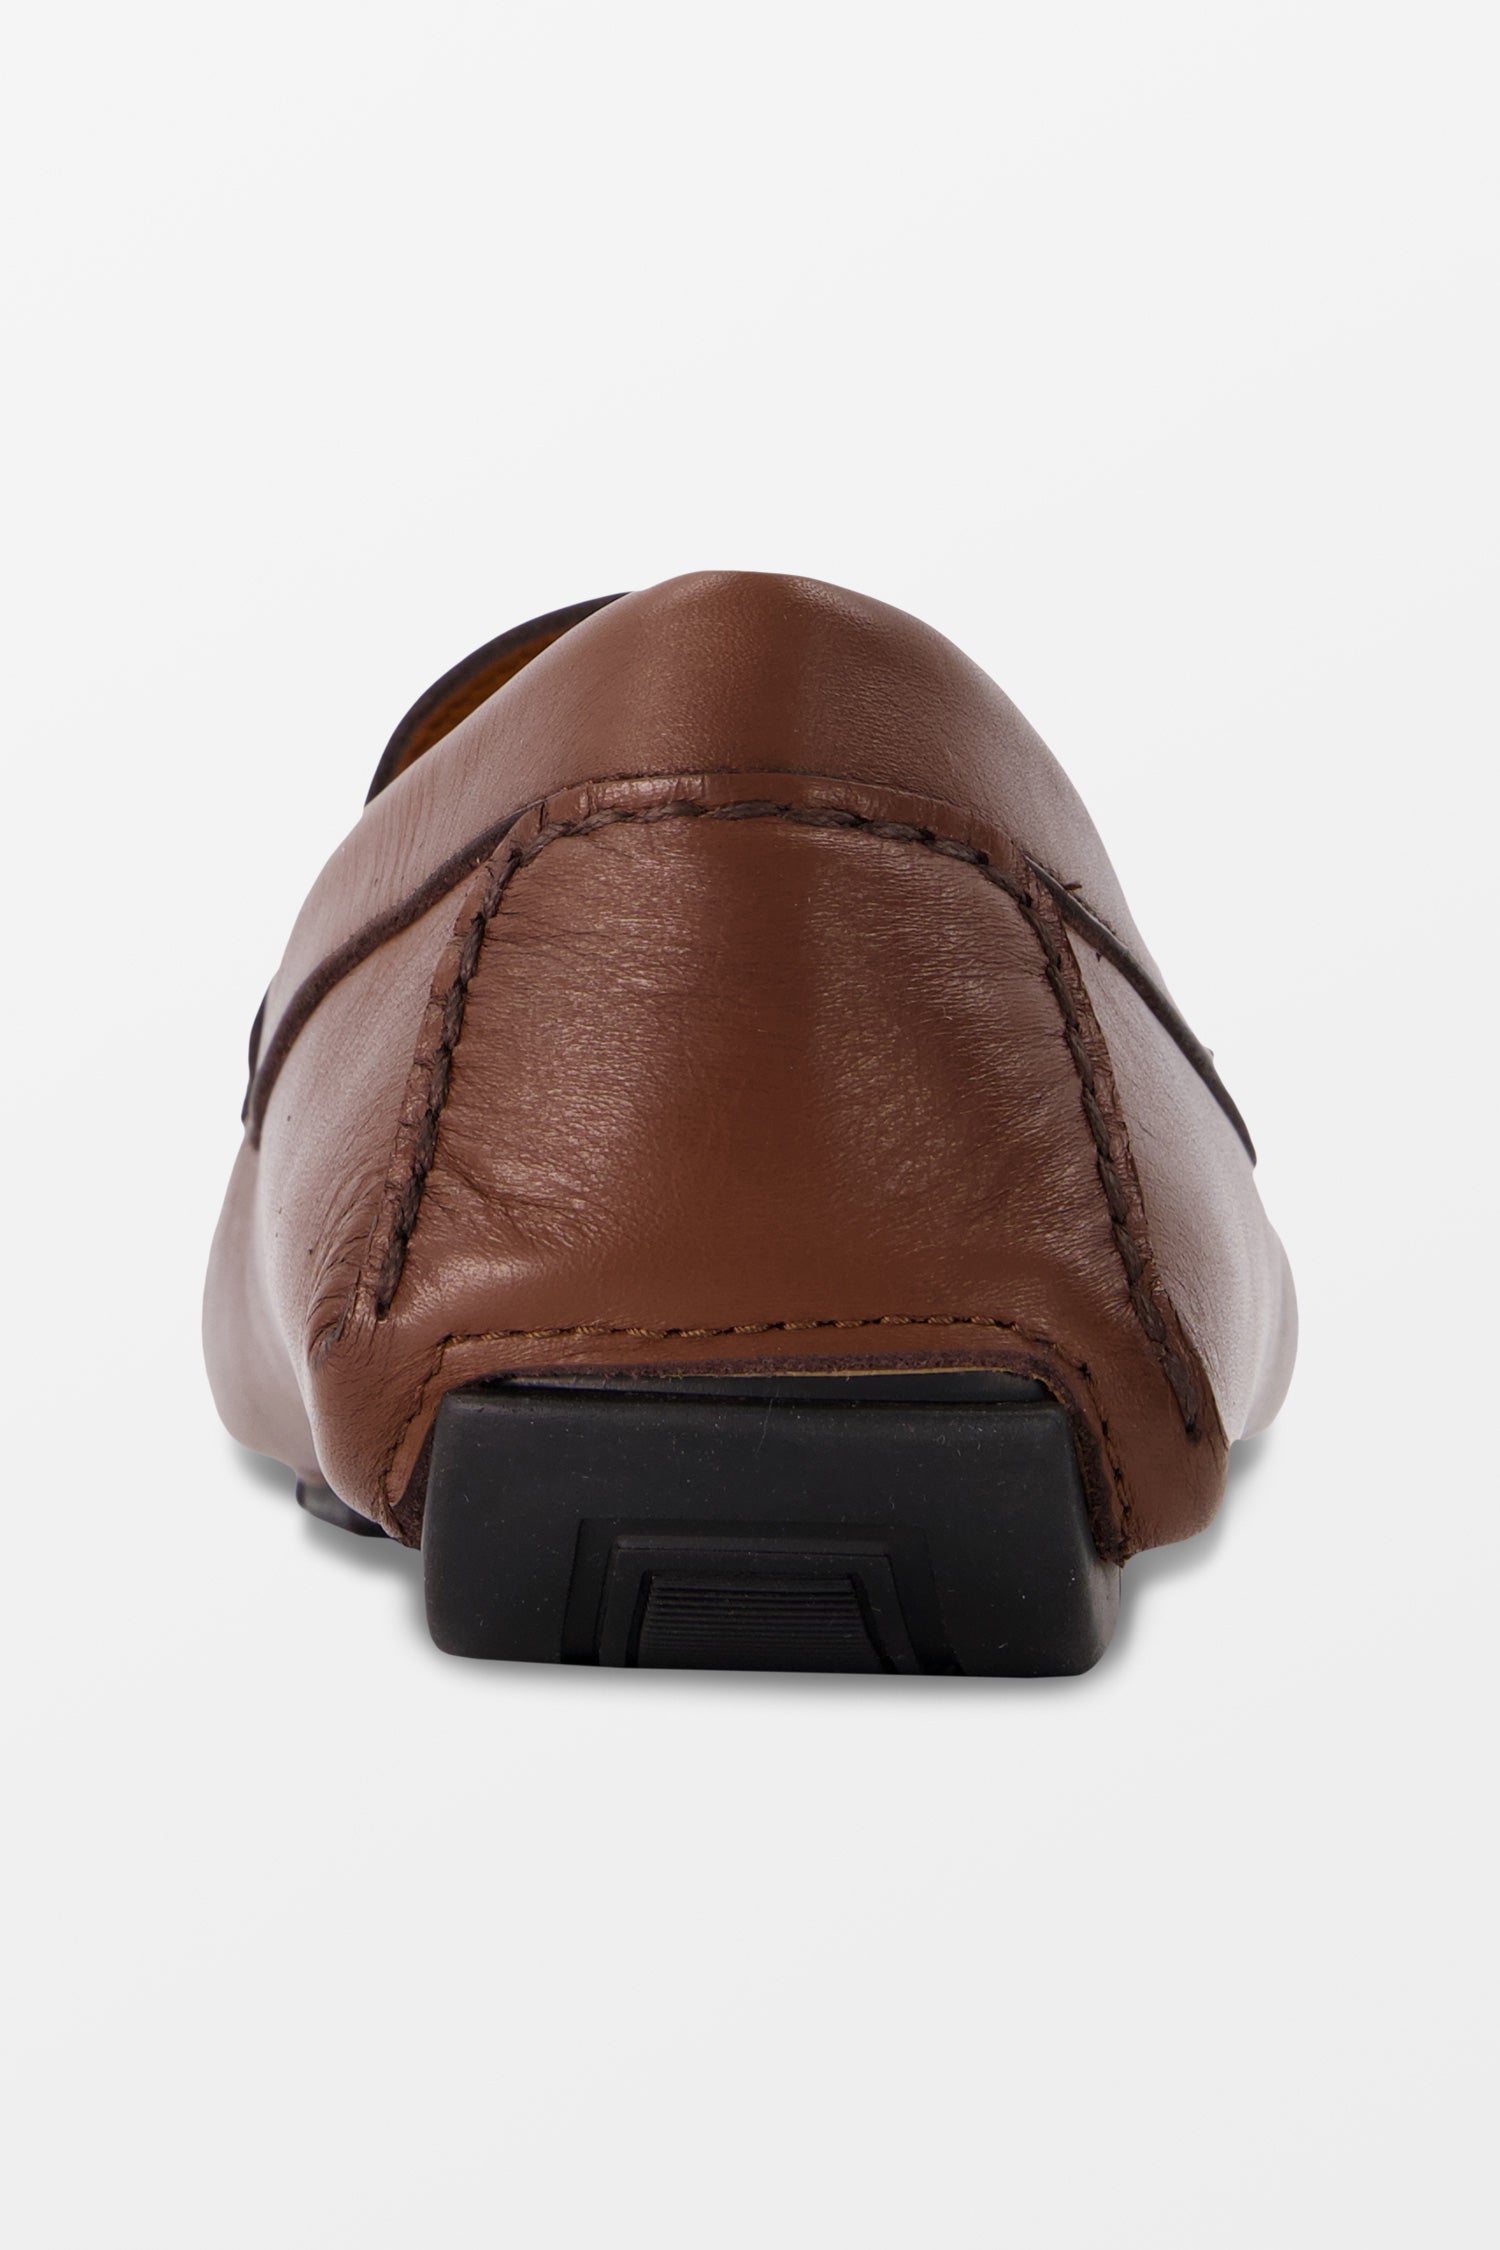 Fiorangelo Brown Leather Moccasins